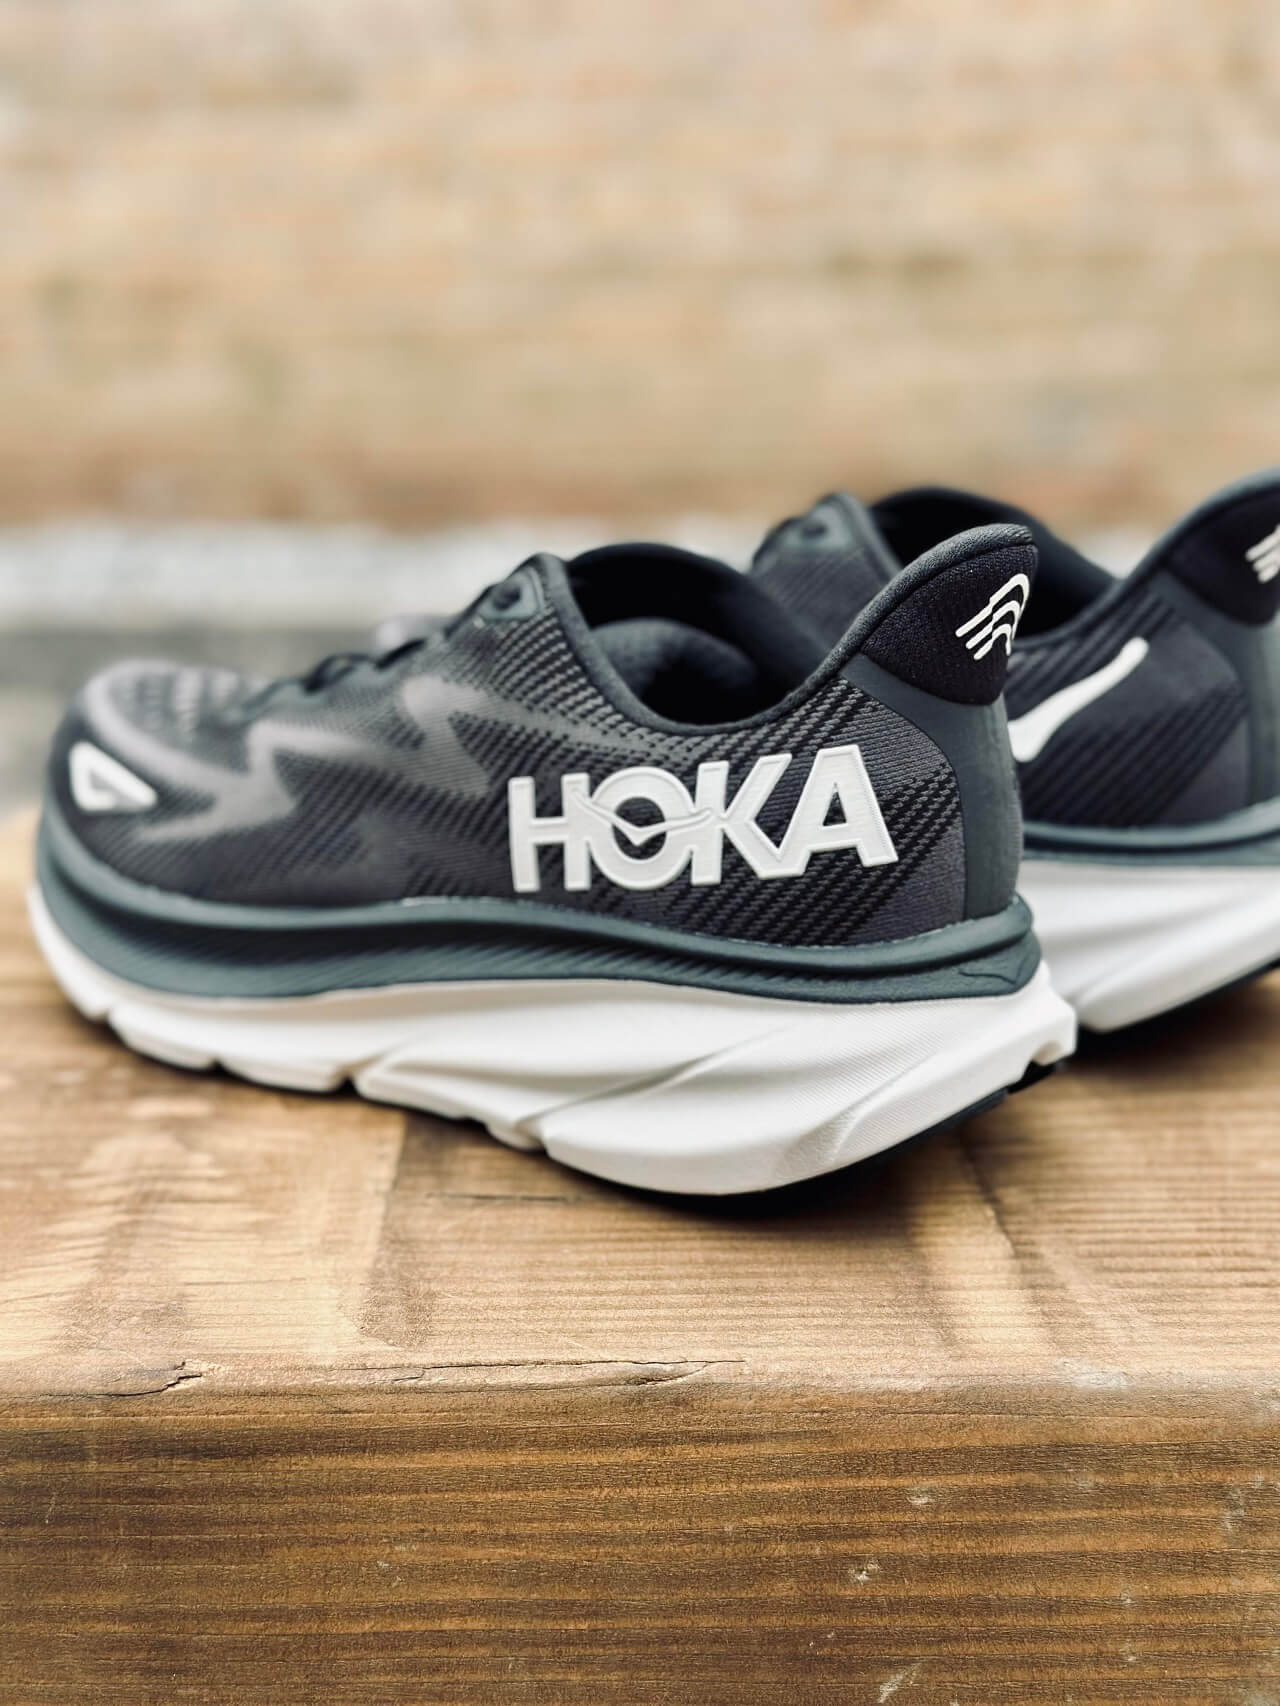 HOKA Clifton 9 running shoes in black on wooden bench